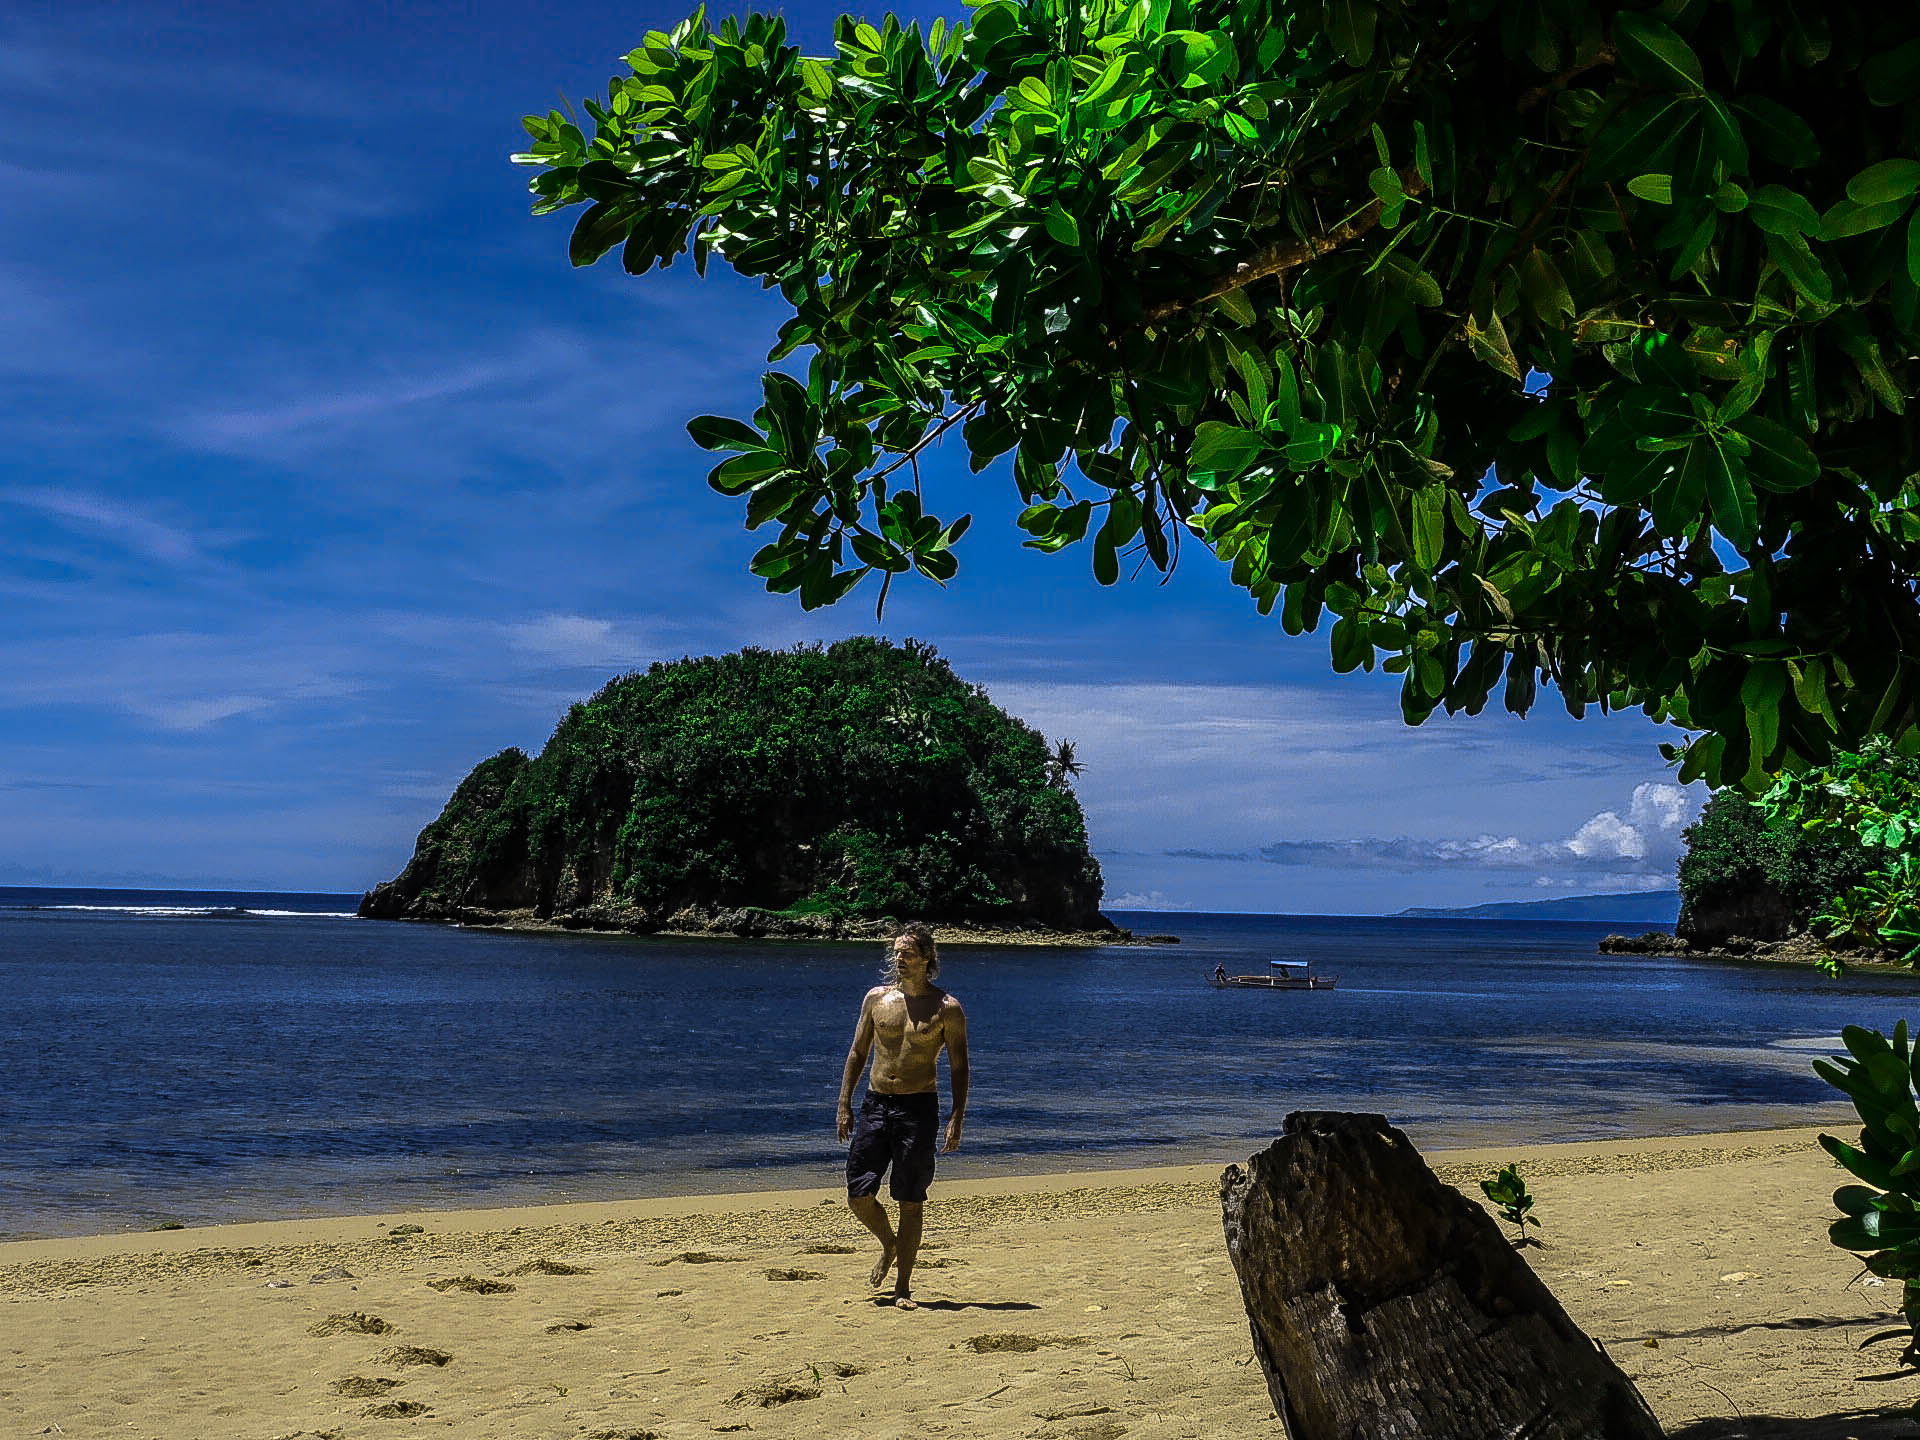 lenny through paradise at twin rock beach in catanduanes philippines